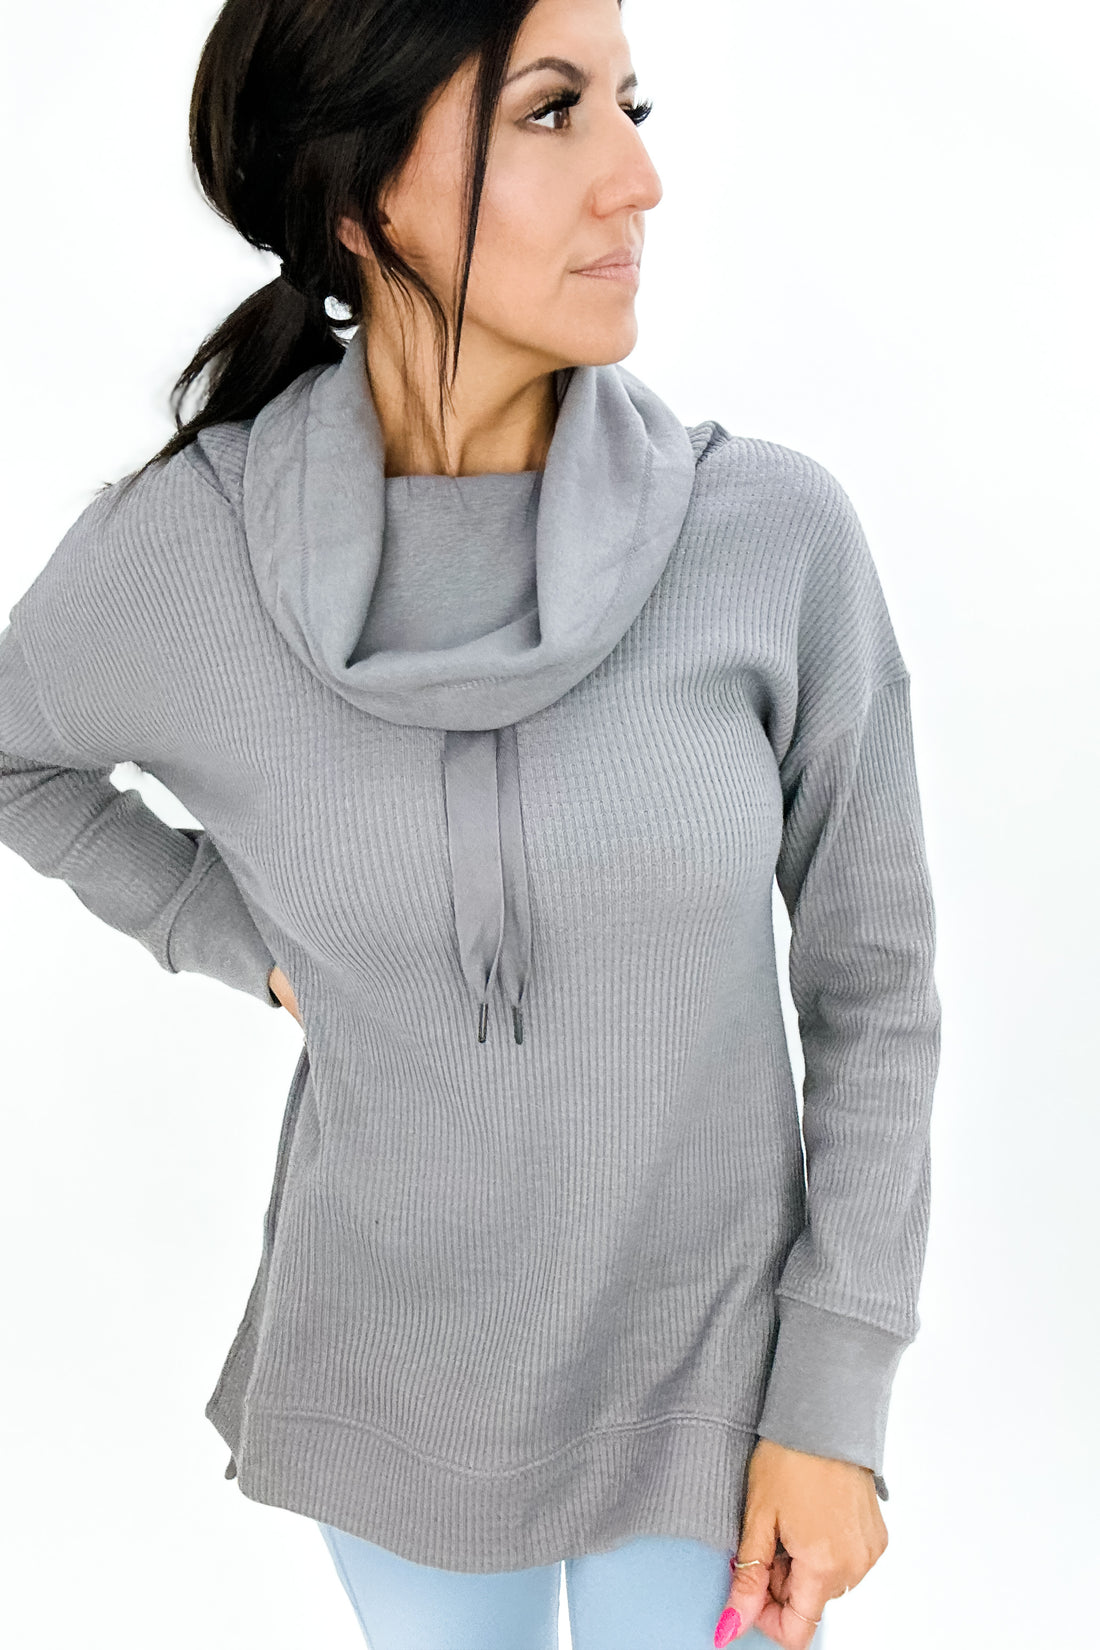 TIME STANDS STILL COWL NECK PULLOVER - FINAL SALE